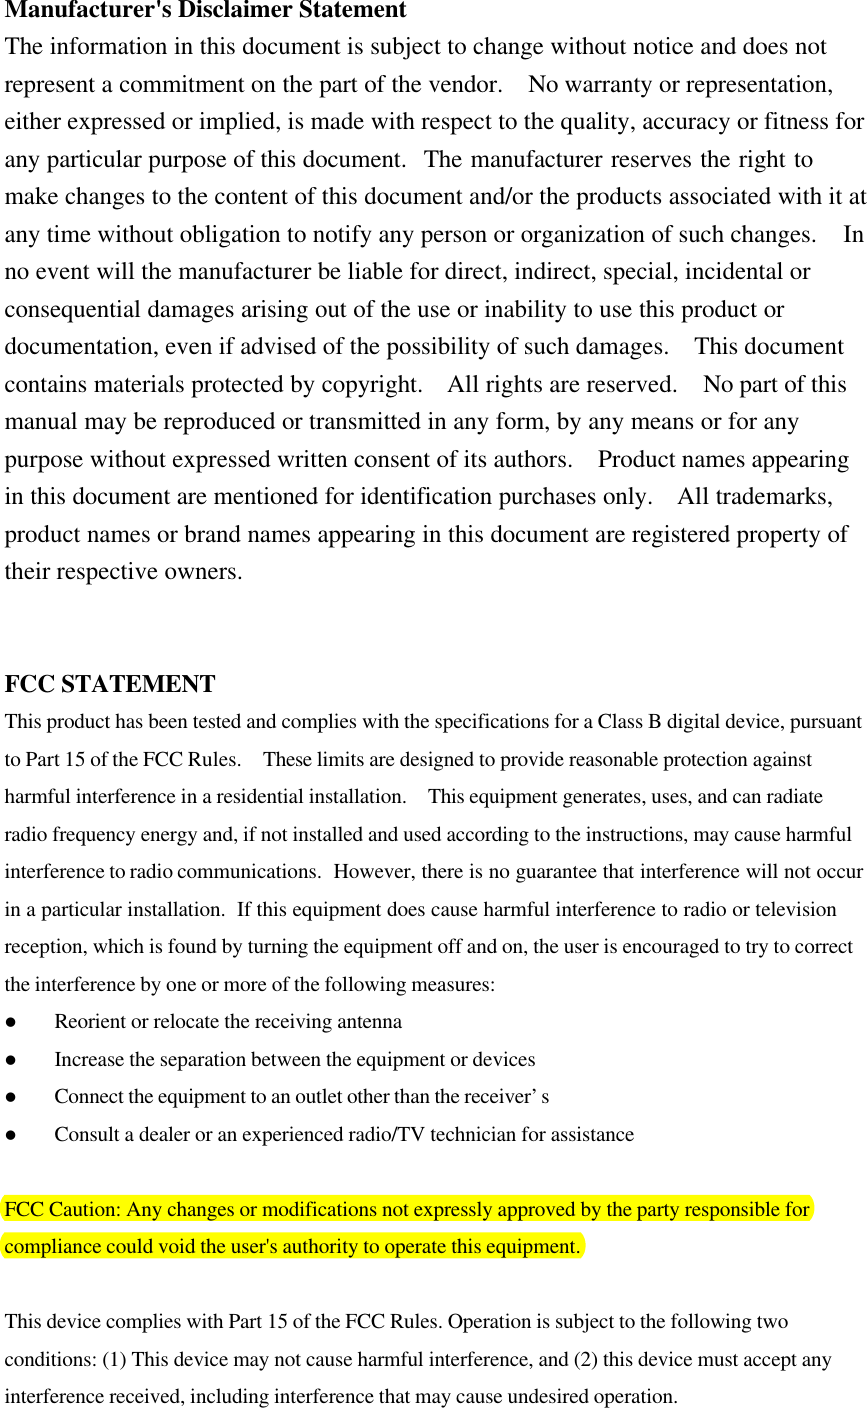 Manufacturer&apos;s Disclaimer StatementThe information in this document is subject to change without notice and does notrepresent a commitment on the part of the vendor.  No warranty or representation,either expressed or implied, is made with respect to the quality, accuracy or fitness forany particular purpose of this document.  The manufacturer reserves the right tomake changes to the content of this document and/or the products associated with it atany time without obligation to notify any person or organization of such changes.  Inno event will the manufacturer be liable for direct, indirect, special, incidental orconsequential damages arising out of the use or inability to use this product ordocumentation, even if advised of the possibility of such damages.  This documentcontains materials protected by copyright.  All rights are reserved.  No part of thismanual may be reproduced or transmitted in any form, by any means or for anypurpose without expressed written consent of its authors.  Product names appearingin this document are mentioned for identification purchases only.  All trademarks,product names or brand names appearing in this document are registered property oftheir respective owners.FCC STATEMENTThis product has been tested and complies with the specifications for a Class B digital device, pursuantto Part 15 of the FCC Rules.  These limits are designed to provide reasonable protection againstharmful interference in a residential installation.  This equipment generates, uses, and can radiateradio frequency energy and, if not installed and used according to the instructions, may cause harmfulinterference to radio communications.  However, there is no guarantee that interference will not occurin a particular installation.  If this equipment does cause harmful interference to radio or televisionreception, which is found by turning the equipment off and on, the user is encouraged to try to correctthe interference by one or more of the following measures:l Reorient or relocate the receiving antennal Increase the separation between the equipment or devicesl Connect the equipment to an outlet other than the receiver’sl Consult a dealer or an experienced radio/TV technician for assistanceFCC Caution: Any changes or modifications not expressly approved by the party responsible forcompliance could void the user&apos;s authority to operate this equipment. This device complies with Part 15 of the FCC Rules. Operation is subject to the following twoconditions: (1) This device may not cause harmful interference, and (2) this device must accept anyinterference received, including interference that may cause undesired operation.